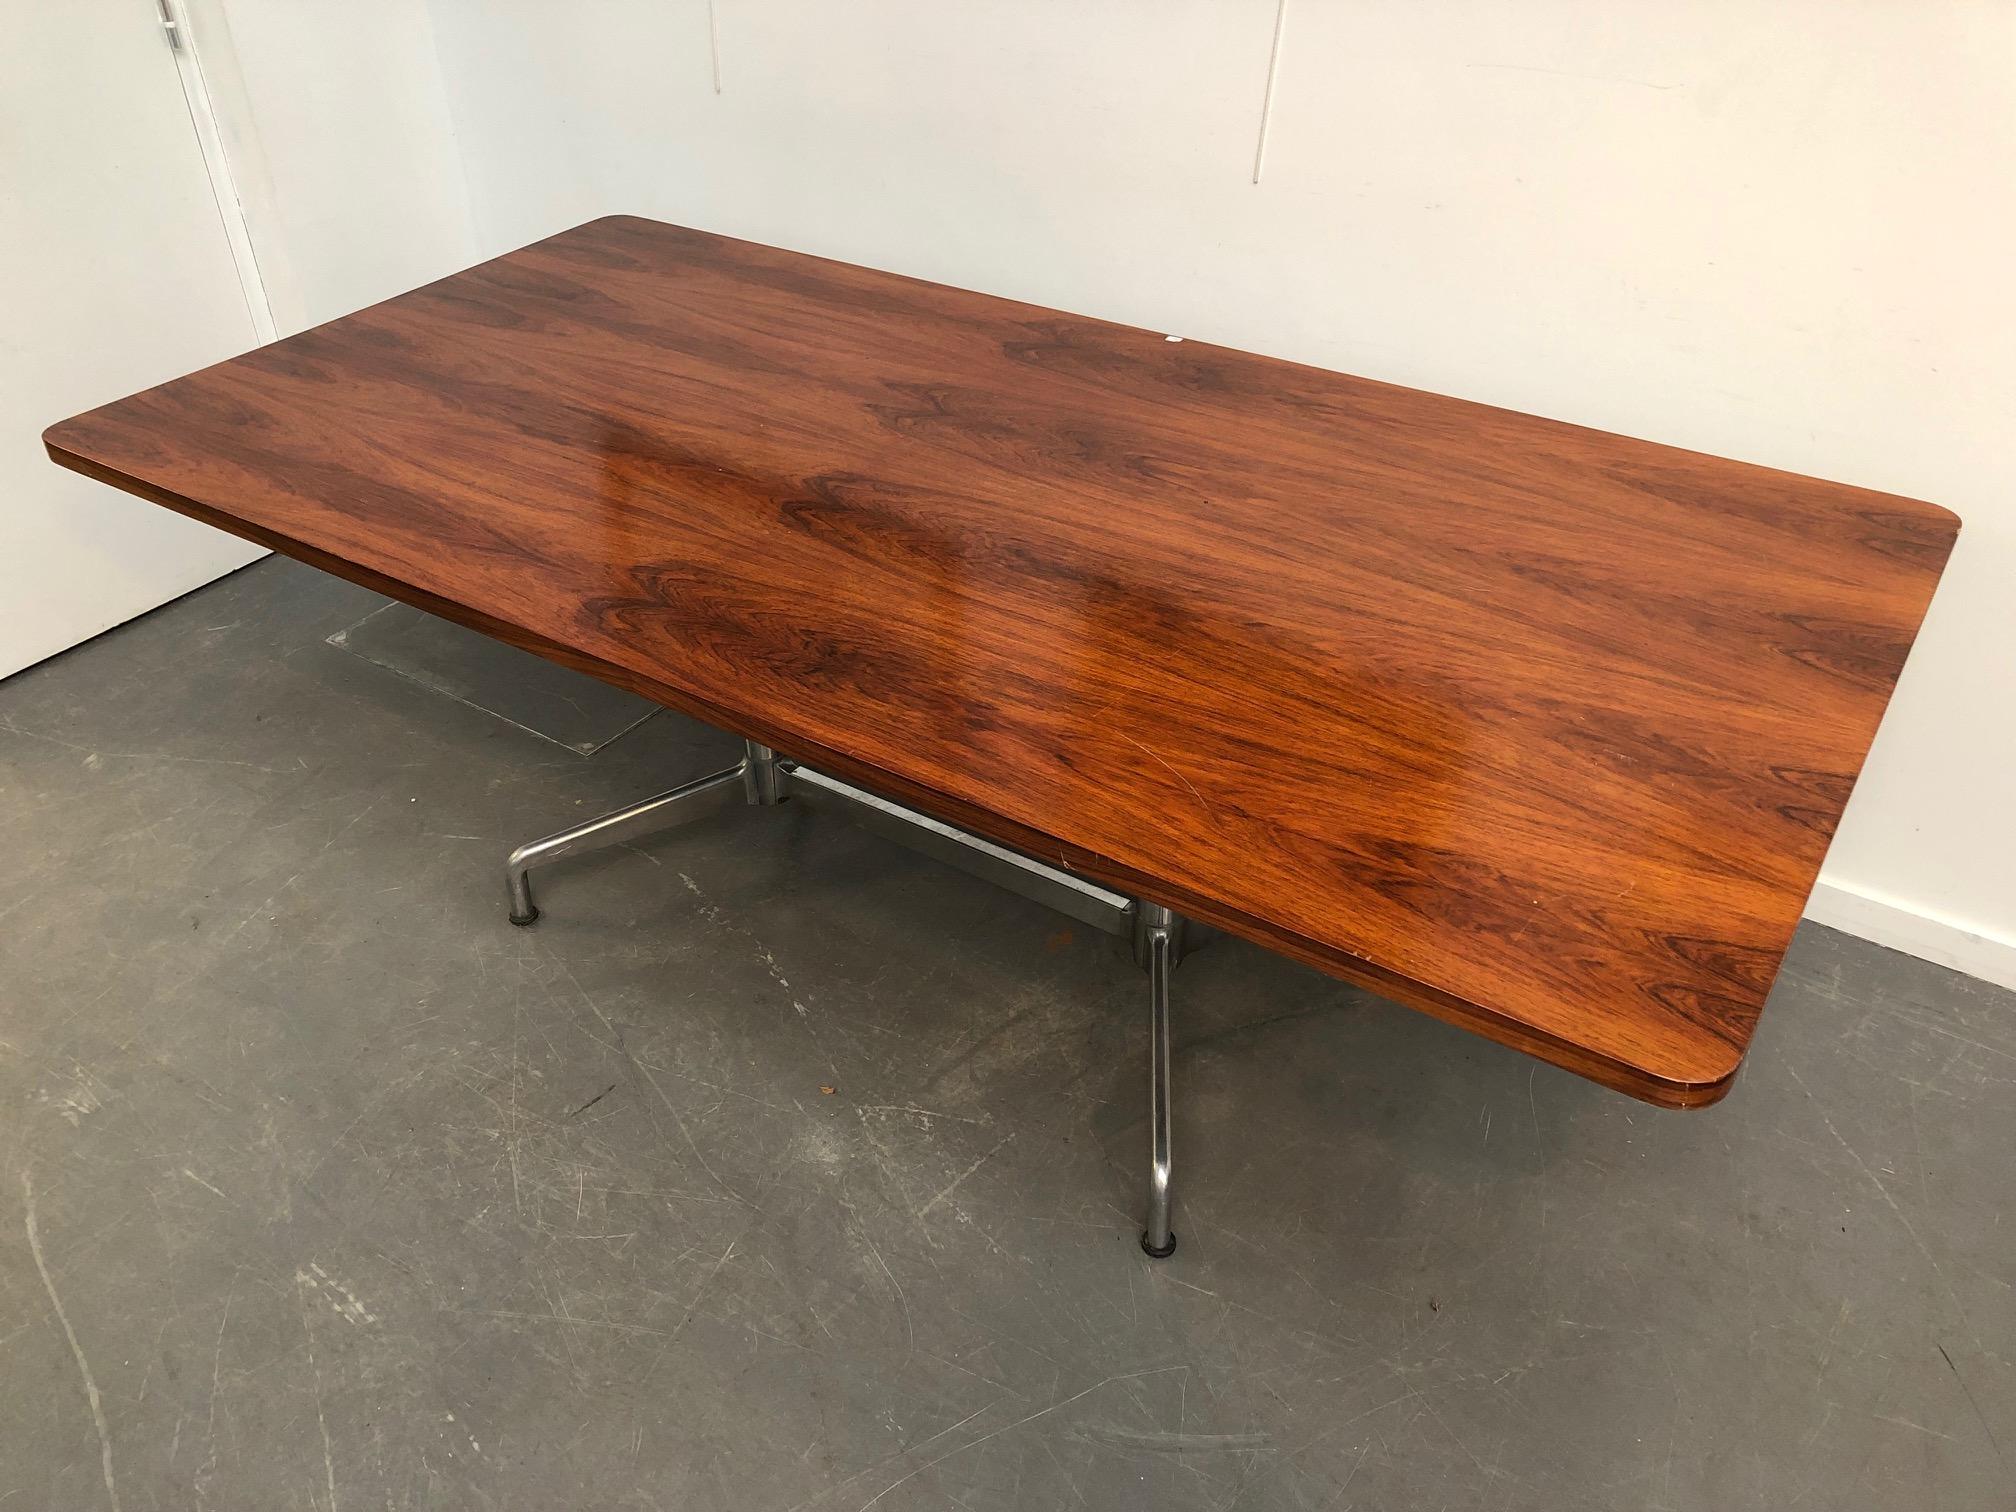 Beautiful Charles Eames Table
Herman Miller Edition
Mahogany on aluminum base
Measures: 214 L x 108 l
Very nice tray
Some stripes
Easily restorable
Very beautiful line
Can serve as a very large desk
1800 Euros.